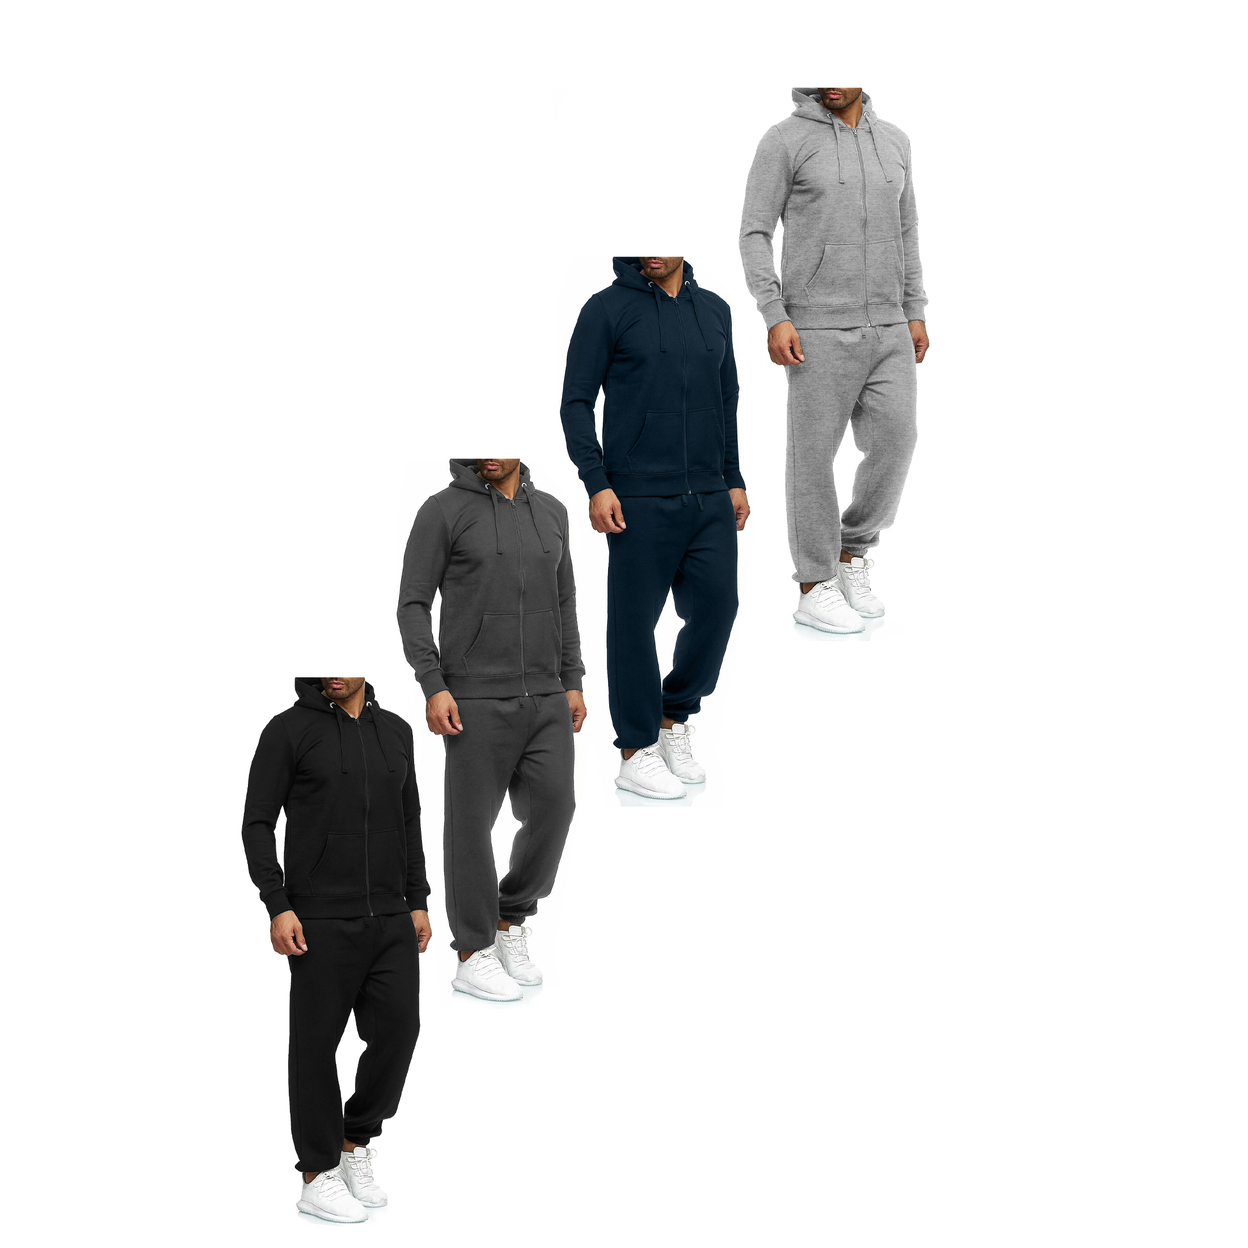 2-Pack: Men's Casual Big & Tall Athletic Active Winter Warm Fleece Lined Full Zip Tracksuit Jogger Set - Grey, 3xl